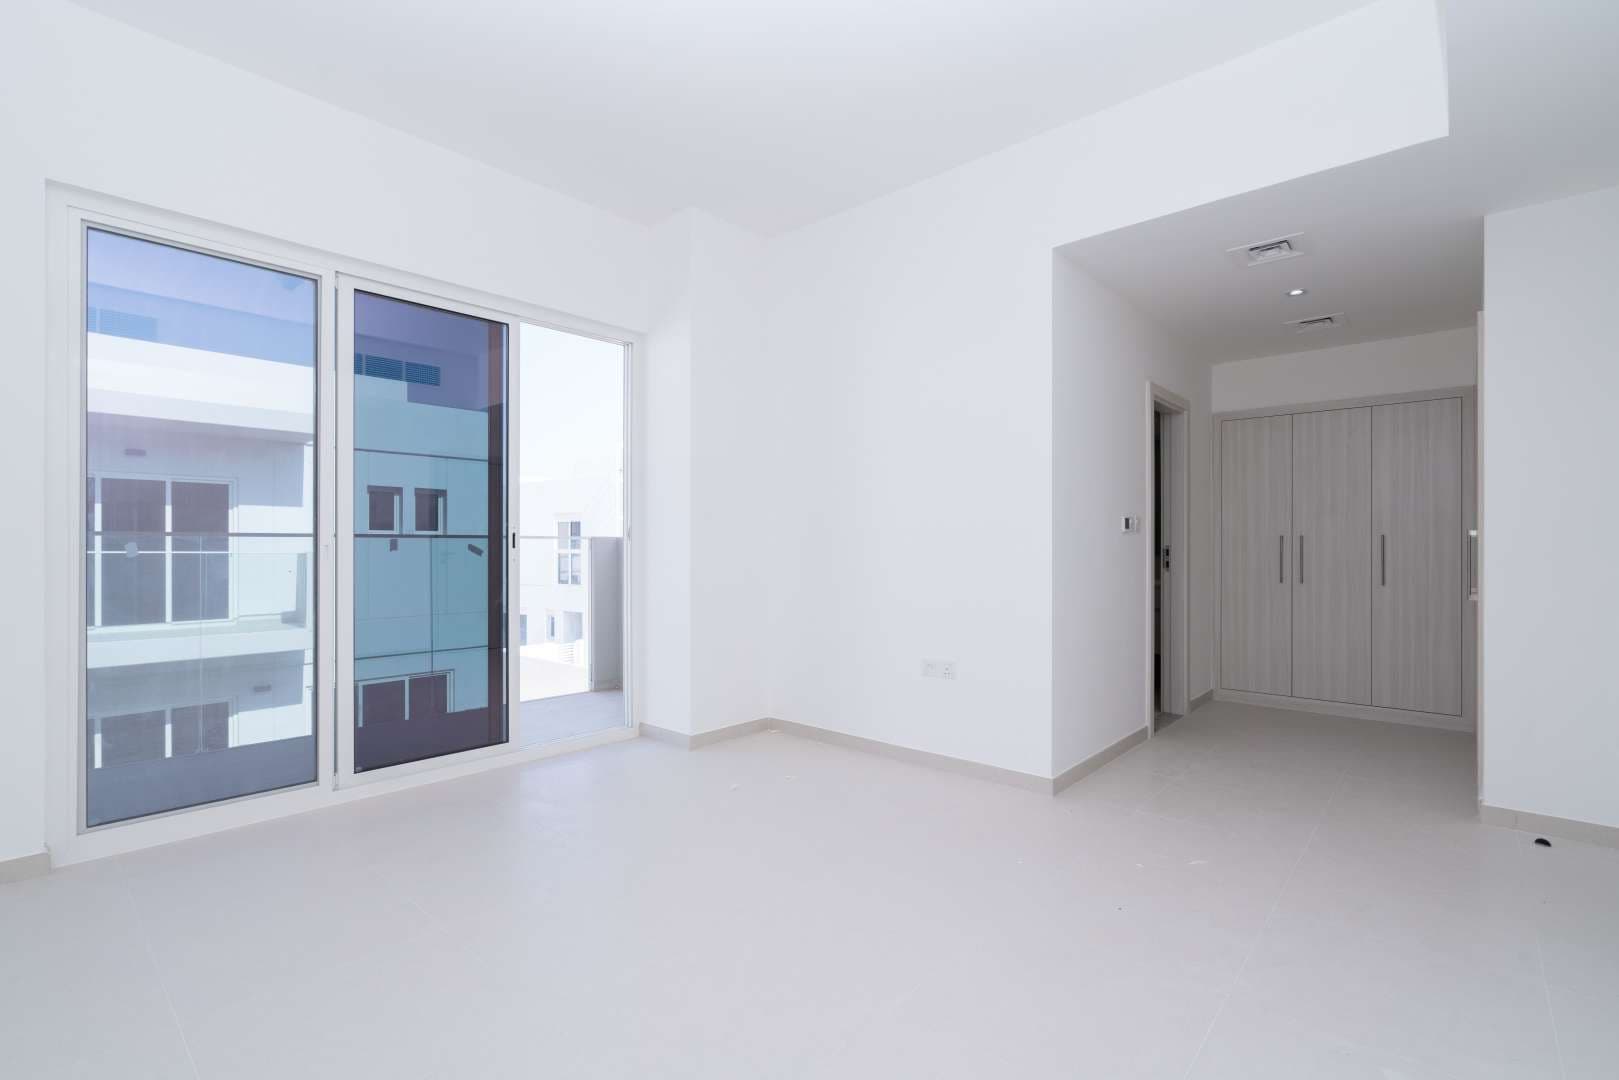 3 Bedroom Townhouse For Sale Arabella Townhouses Lp04321 273776aed3282e00.jpg